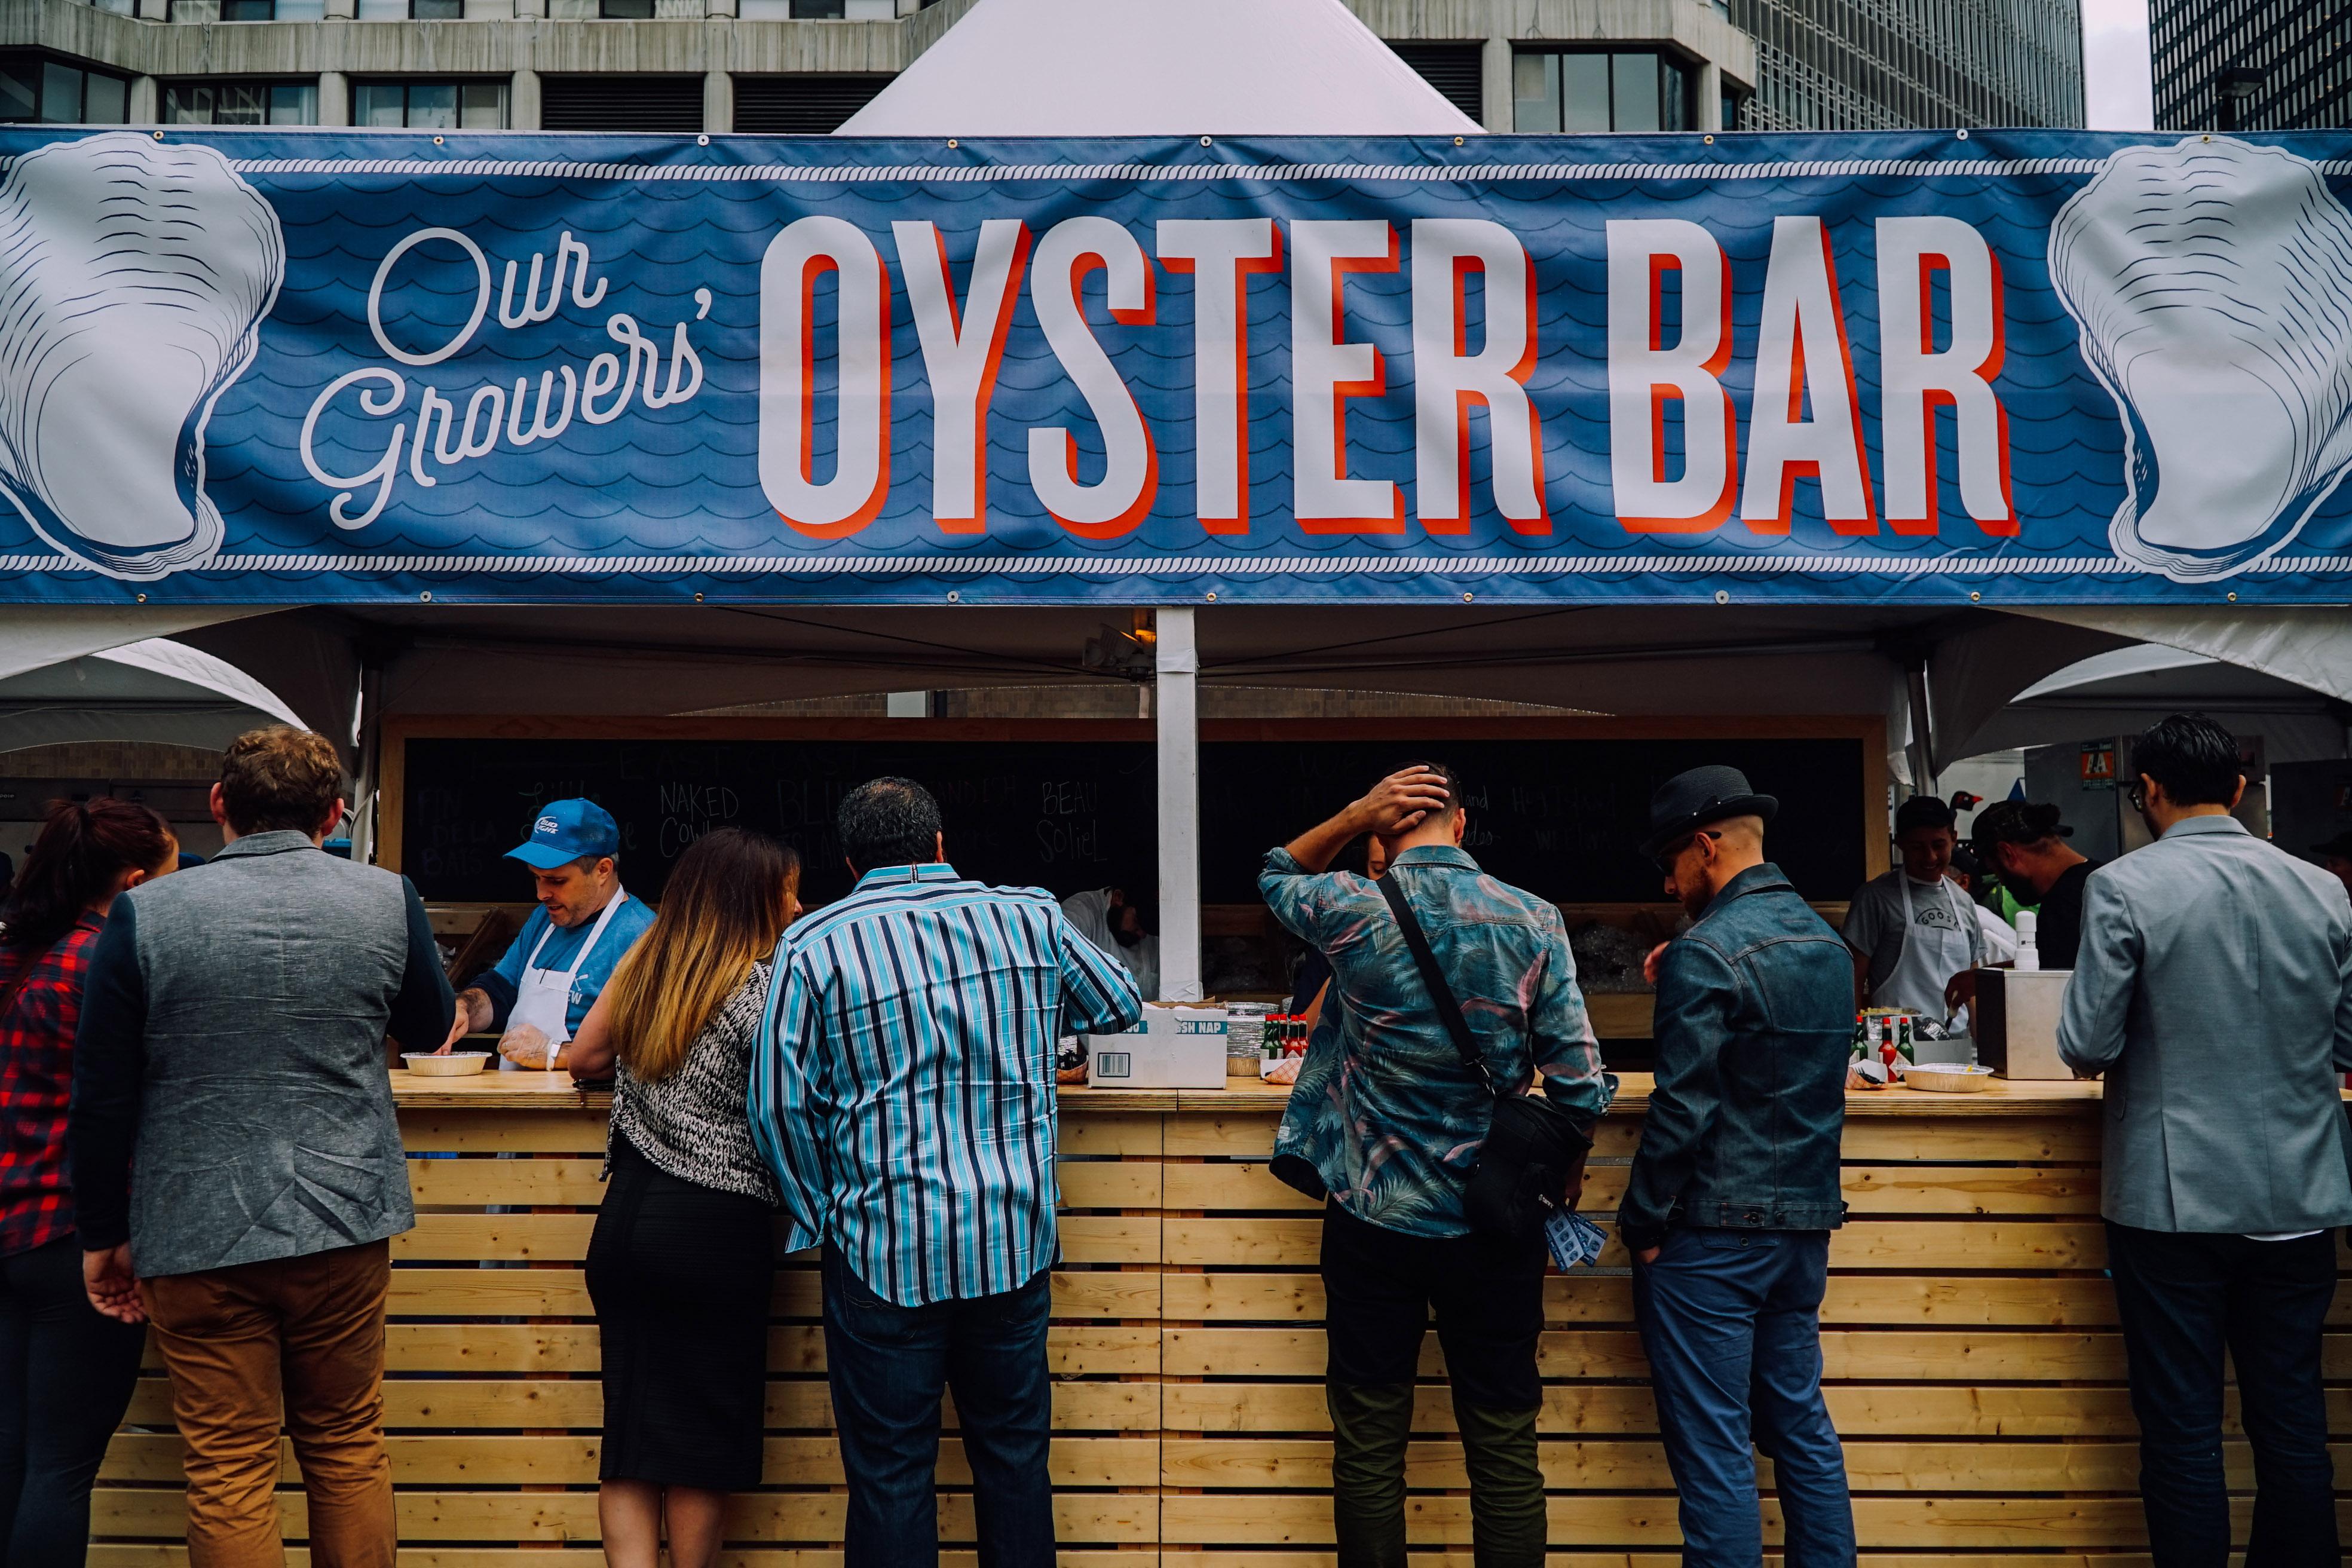 Seafood, blues and beer: It sounds like a winning combination to us. The 28th annual Oyster Fest returns Friday.